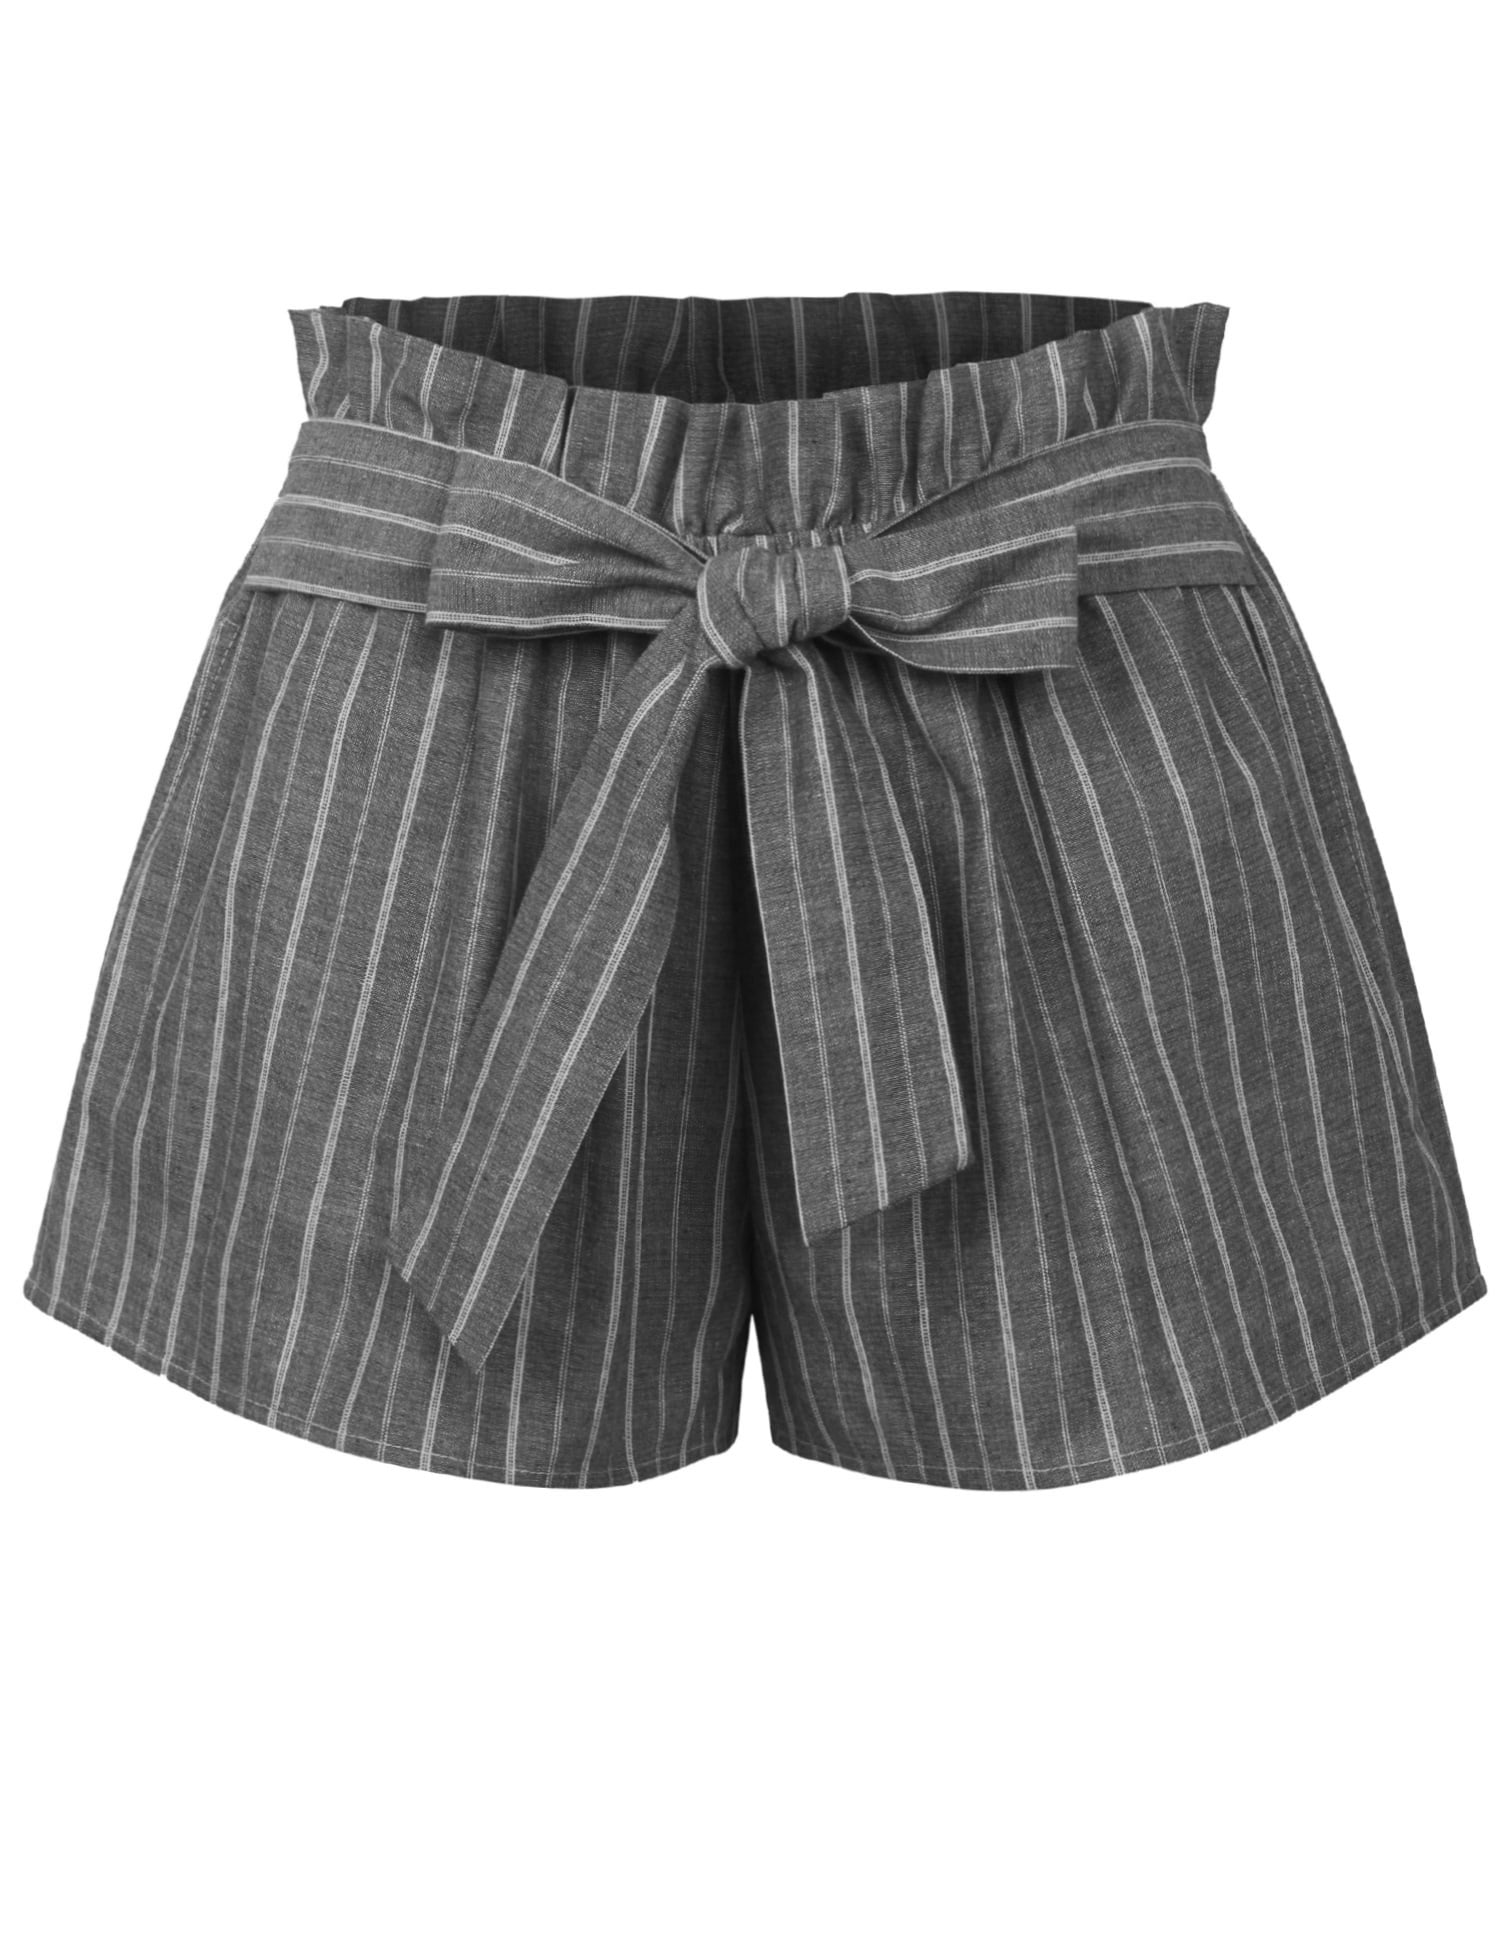 KOGMO Womens Casual Striped Summer Beach Shorts With Self Tie Bow ...